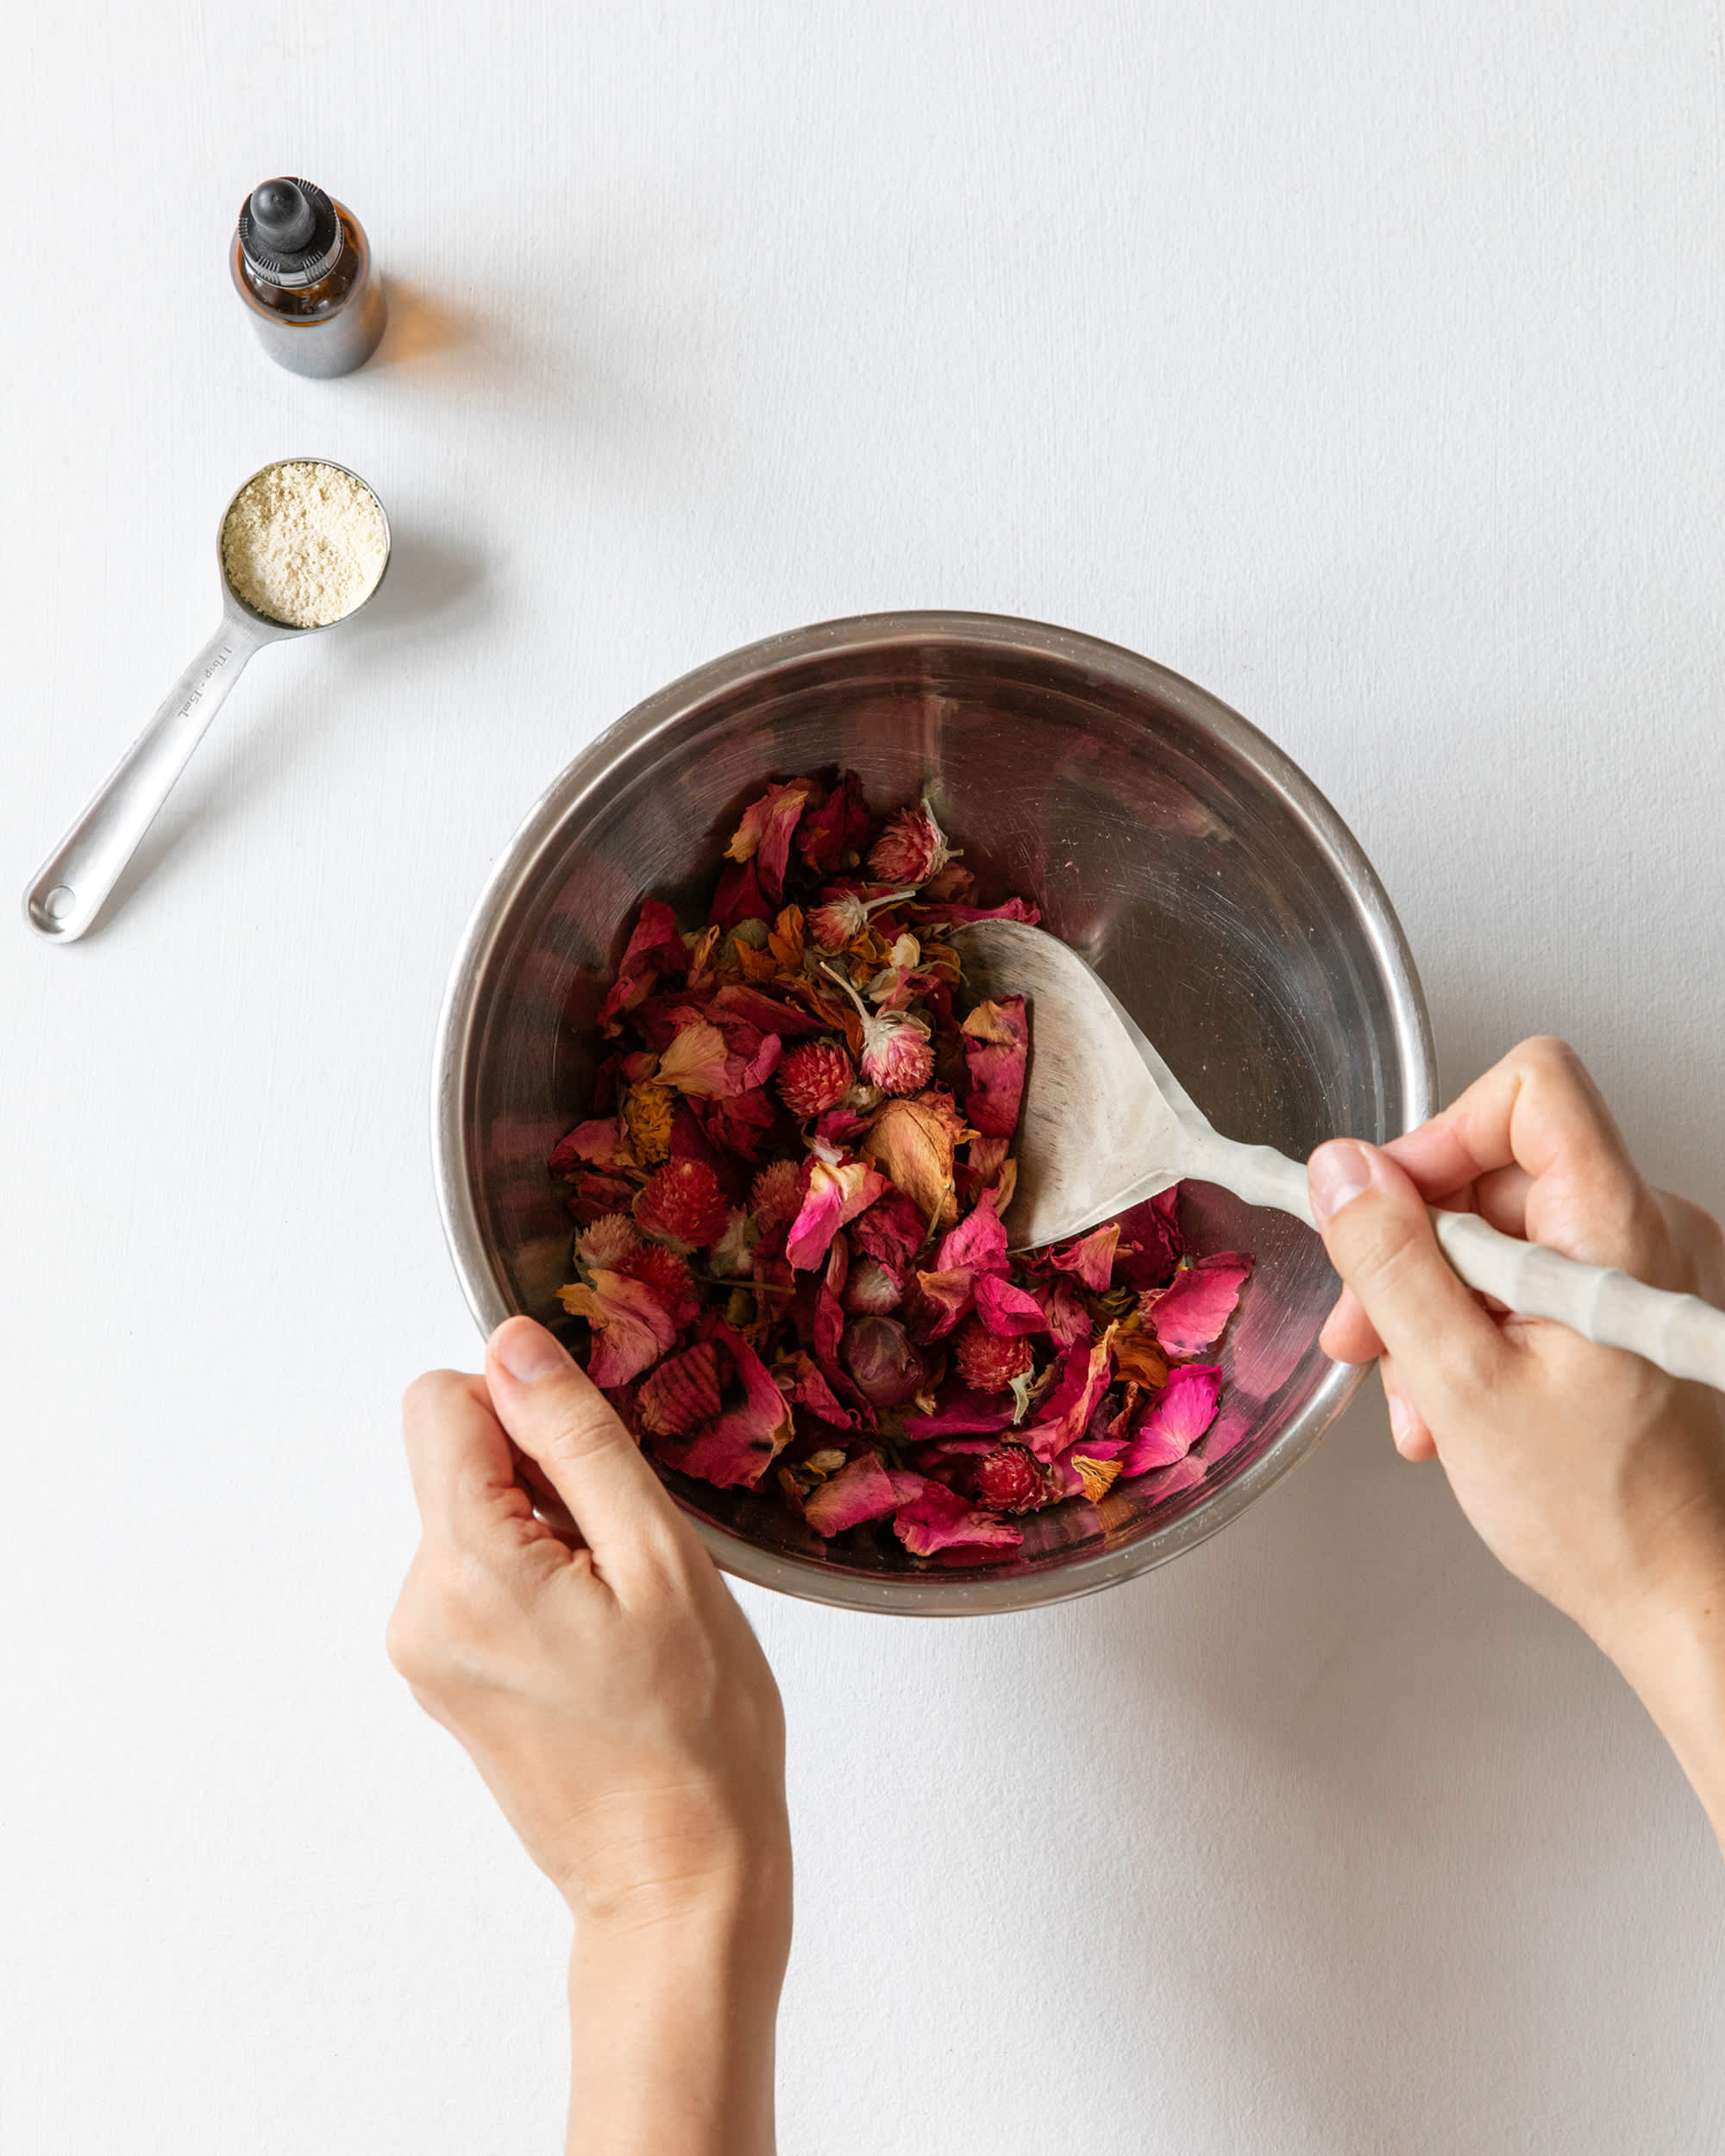 New to Potpourri? Here's a Guide for You